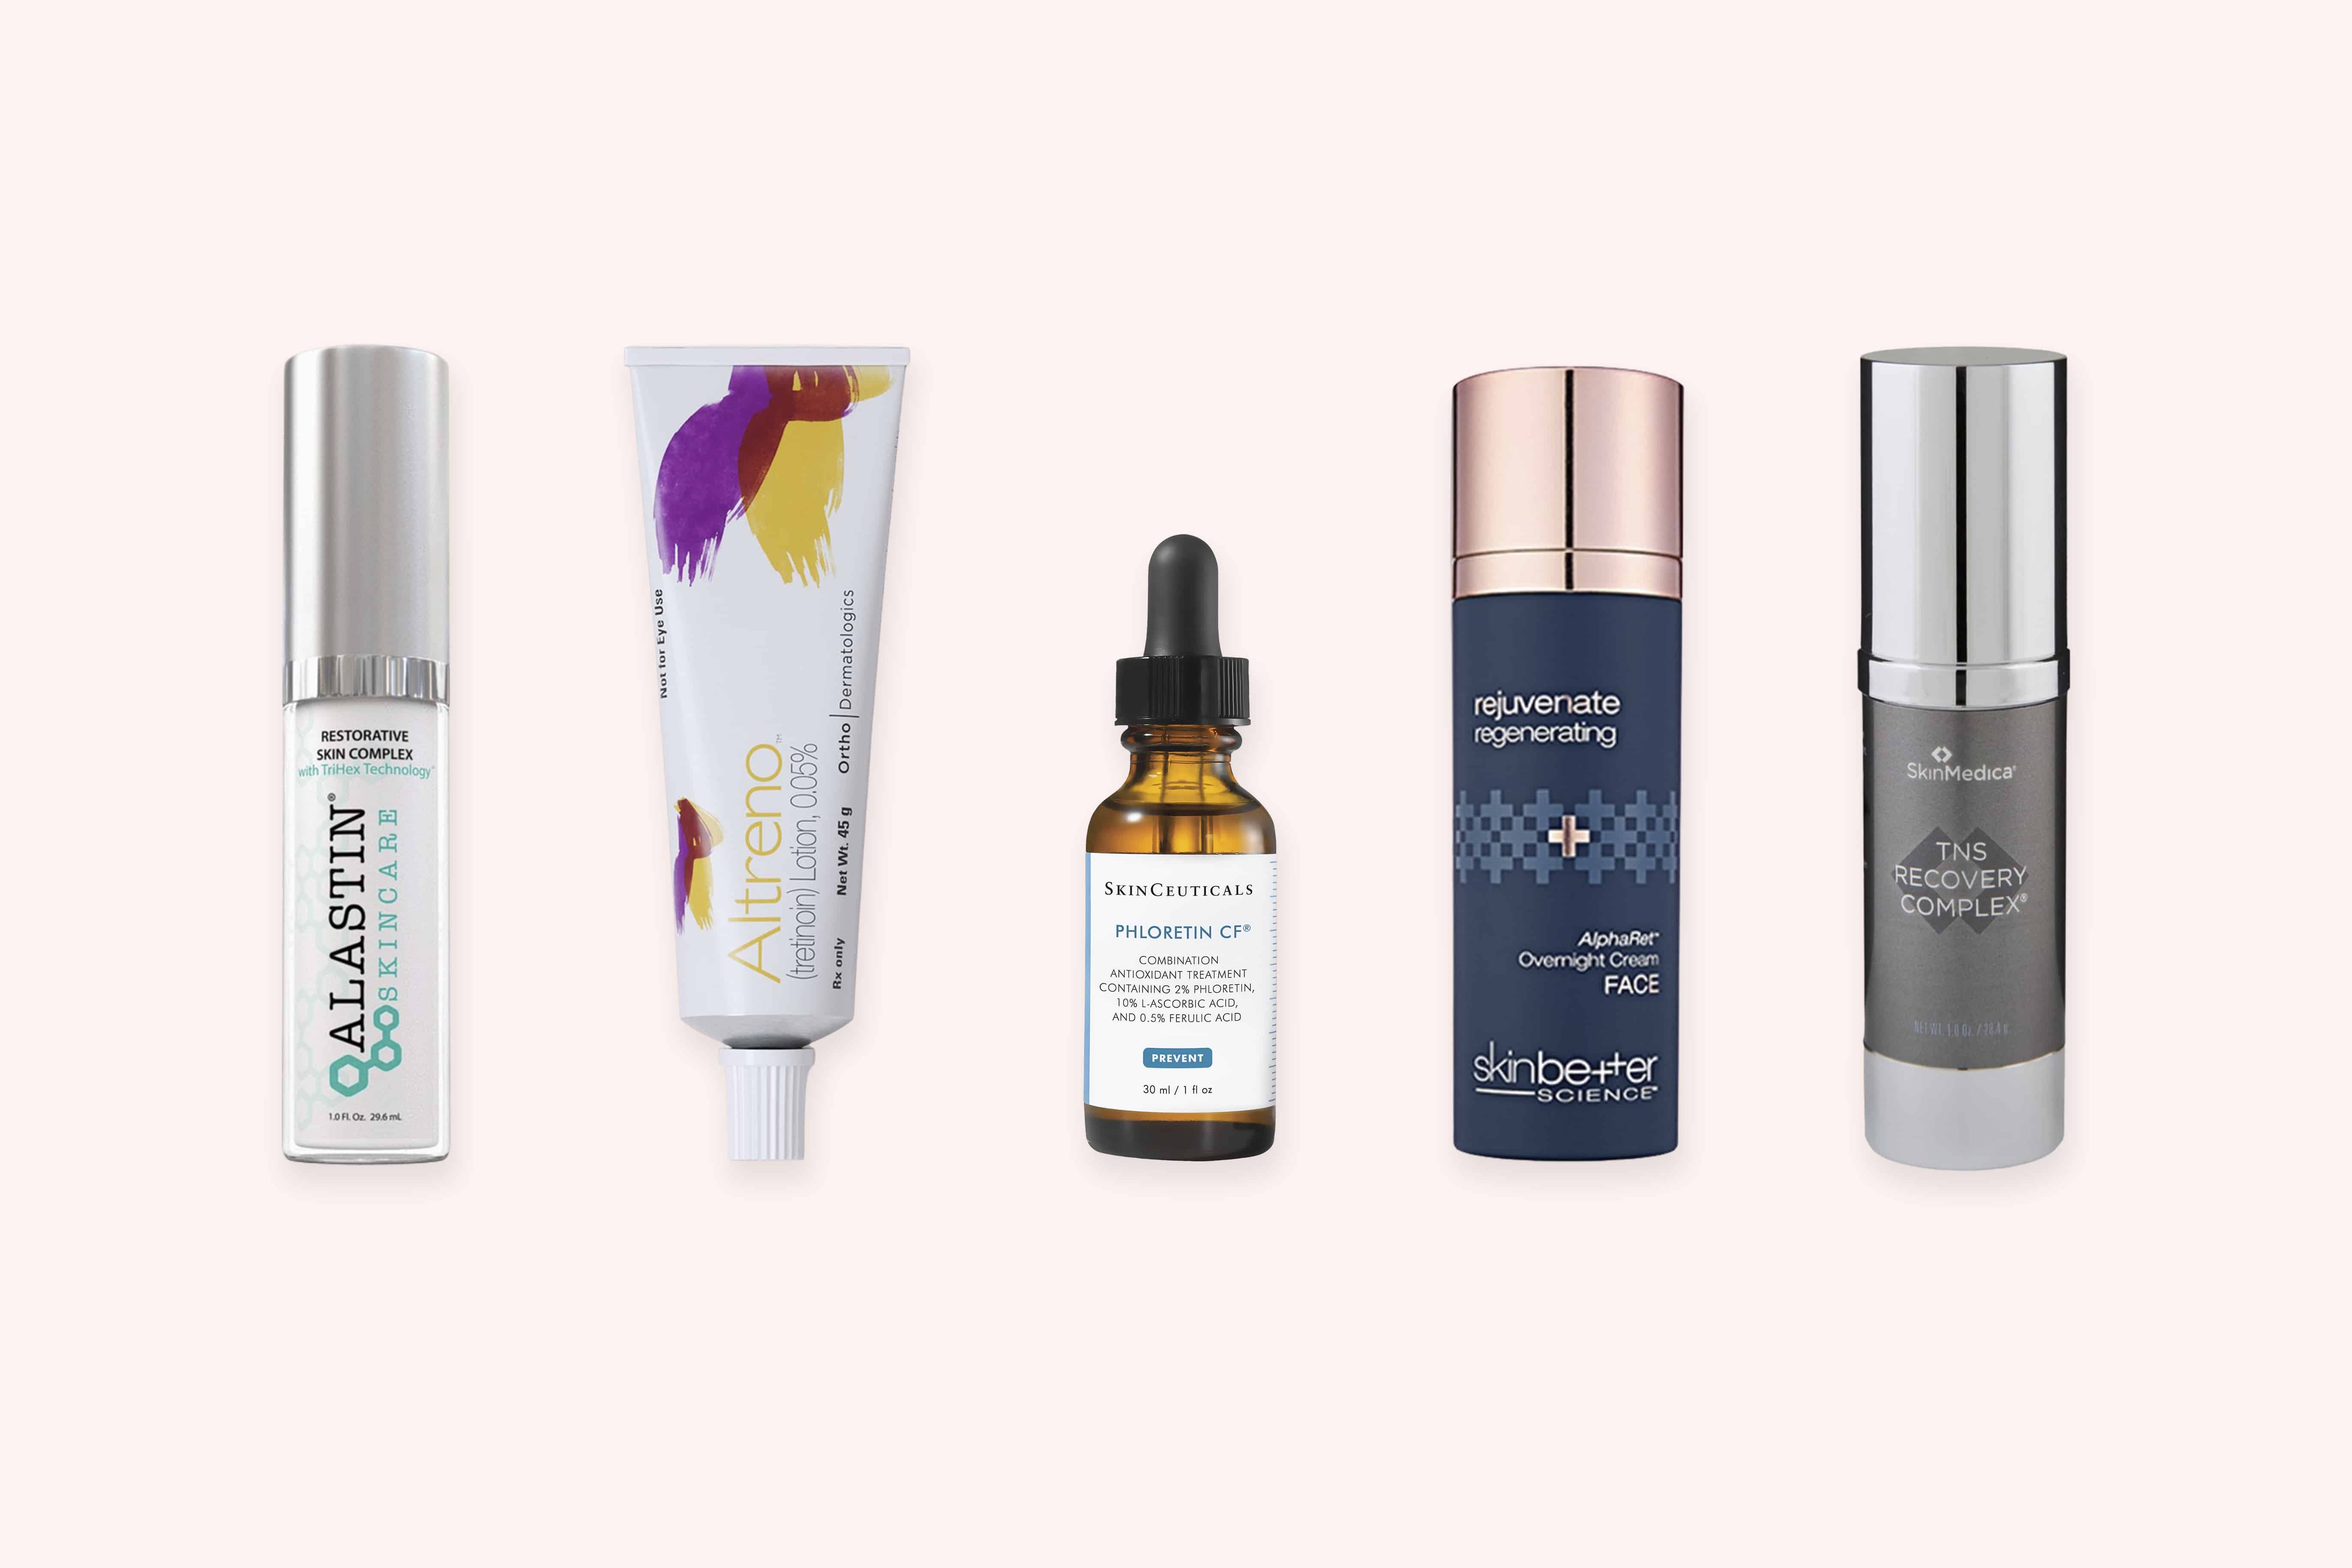 What do beauty’s most science-minded consumers count on to keep skin looking healthy and youthful? Here, the exact products top dermatologists credit.